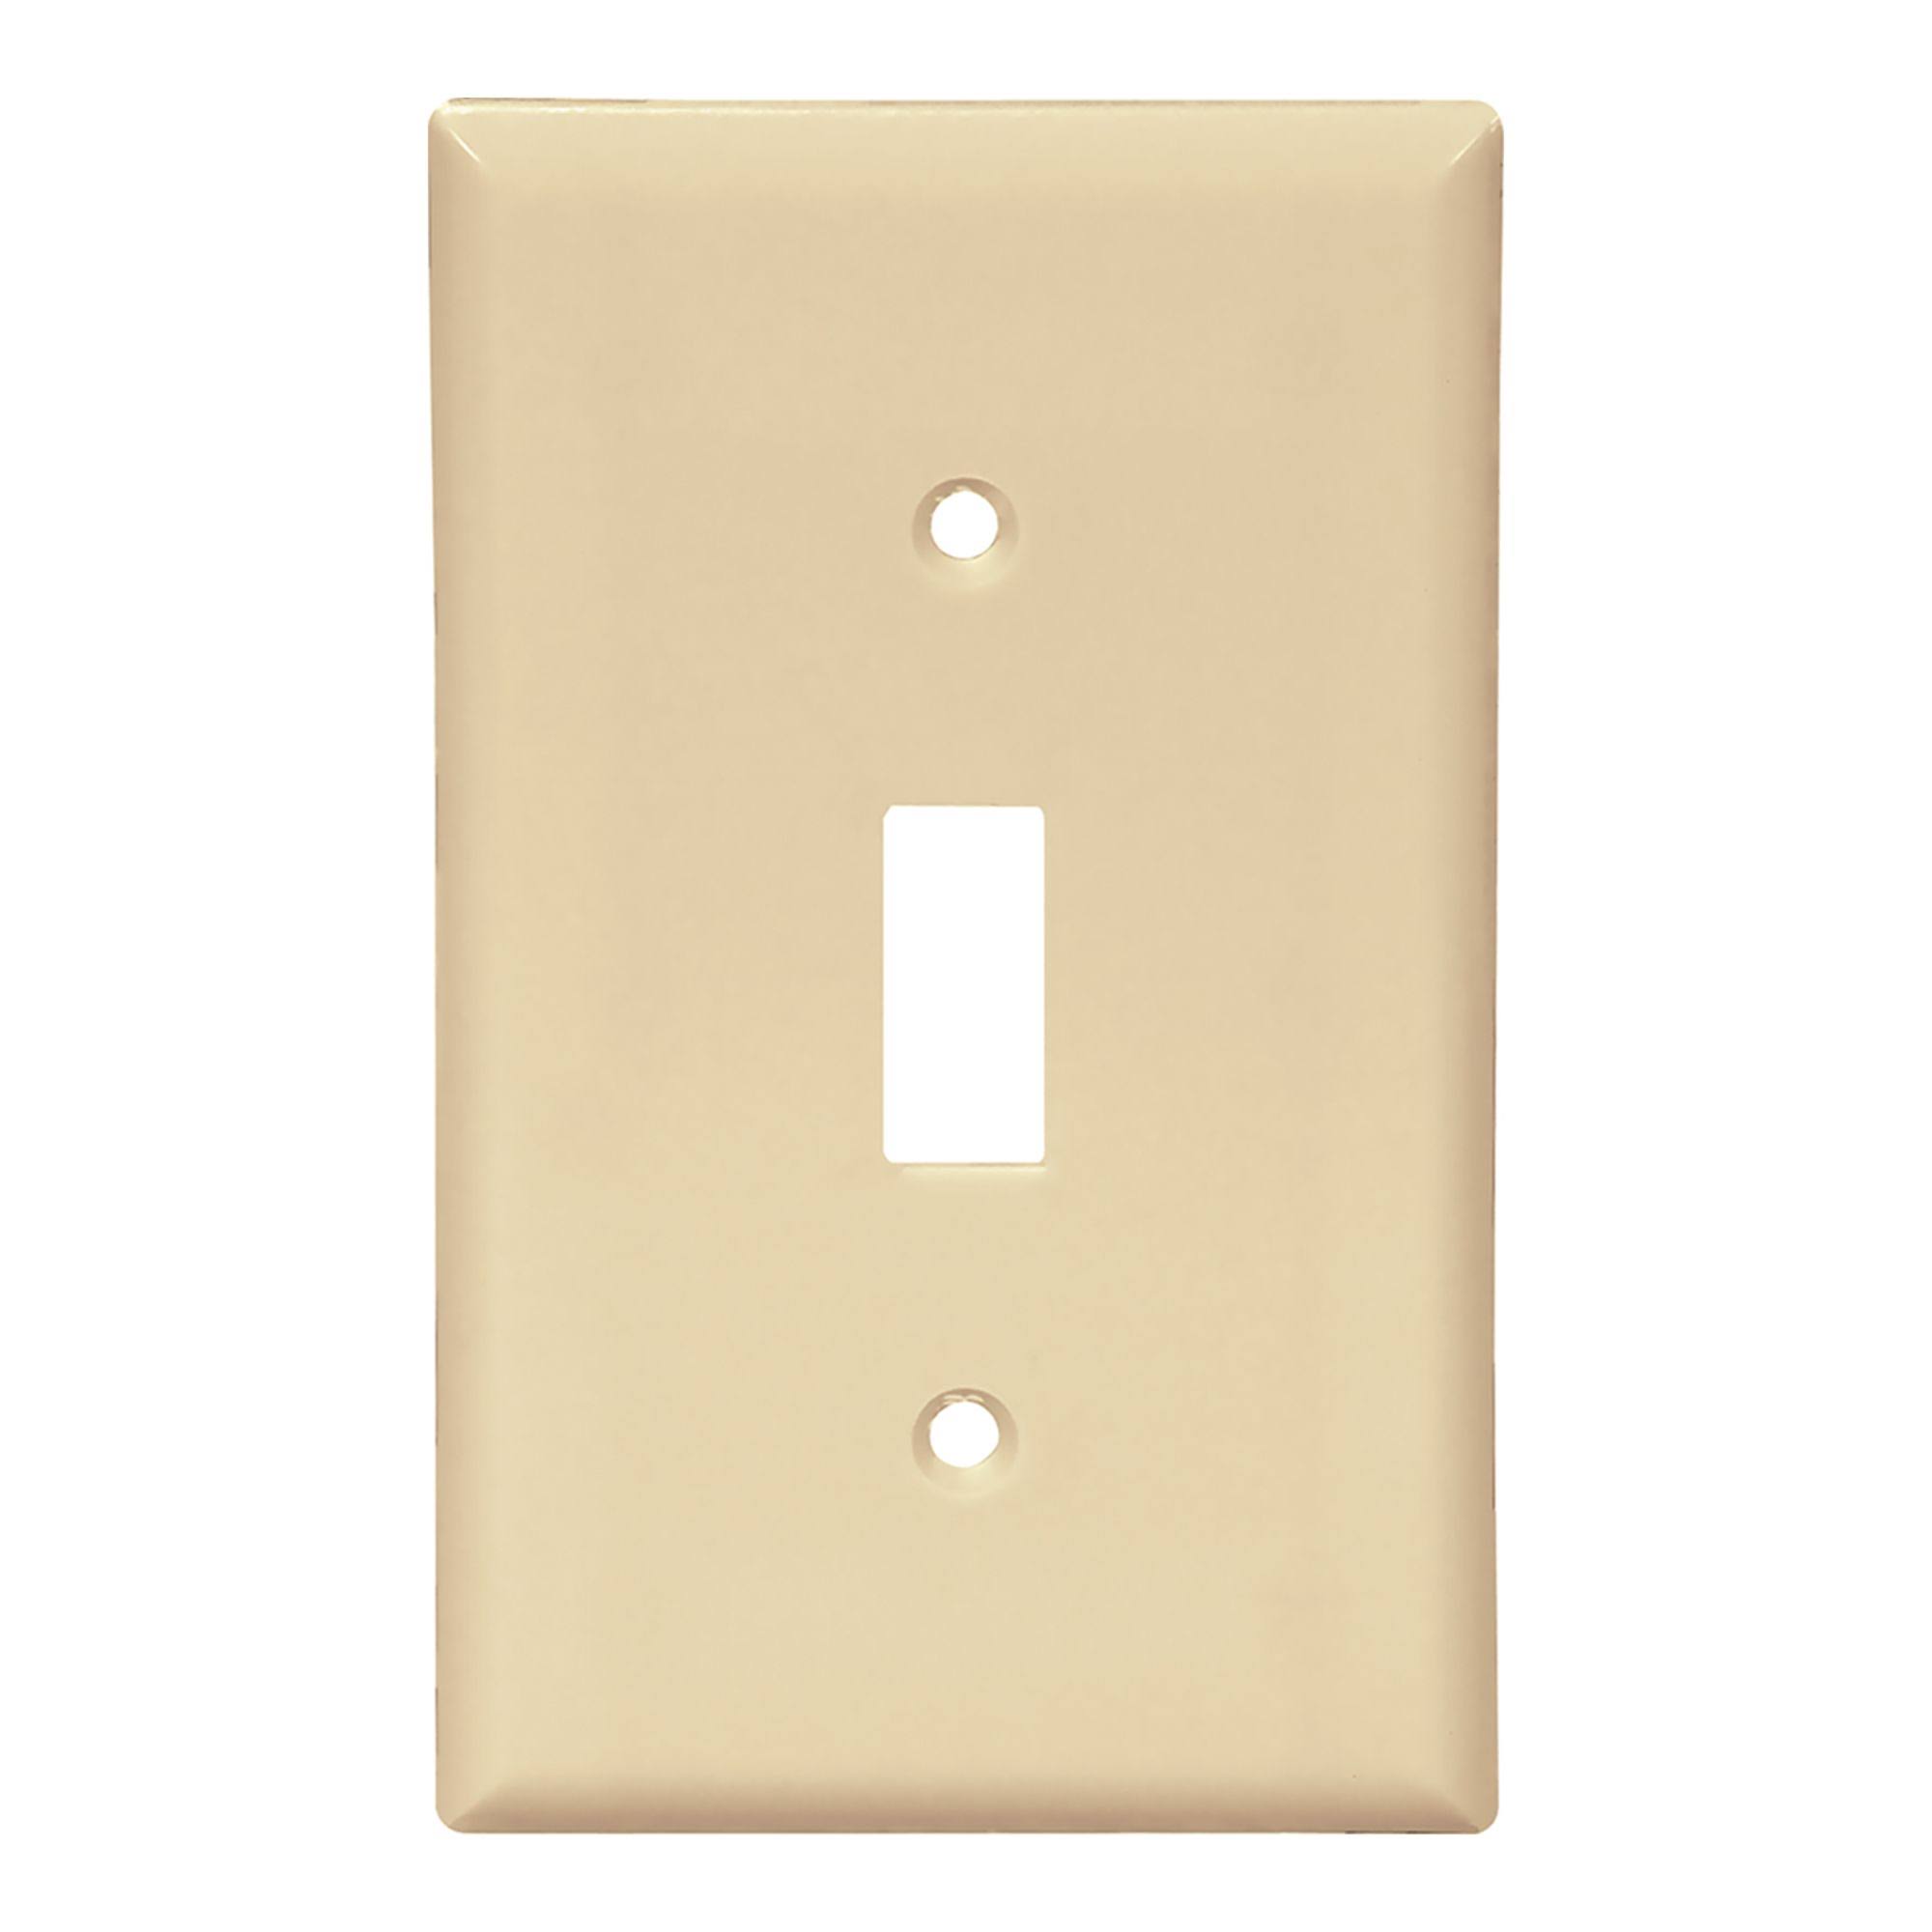 Cooper Wiring Devices Single Toggle Wall Plate - Ivory